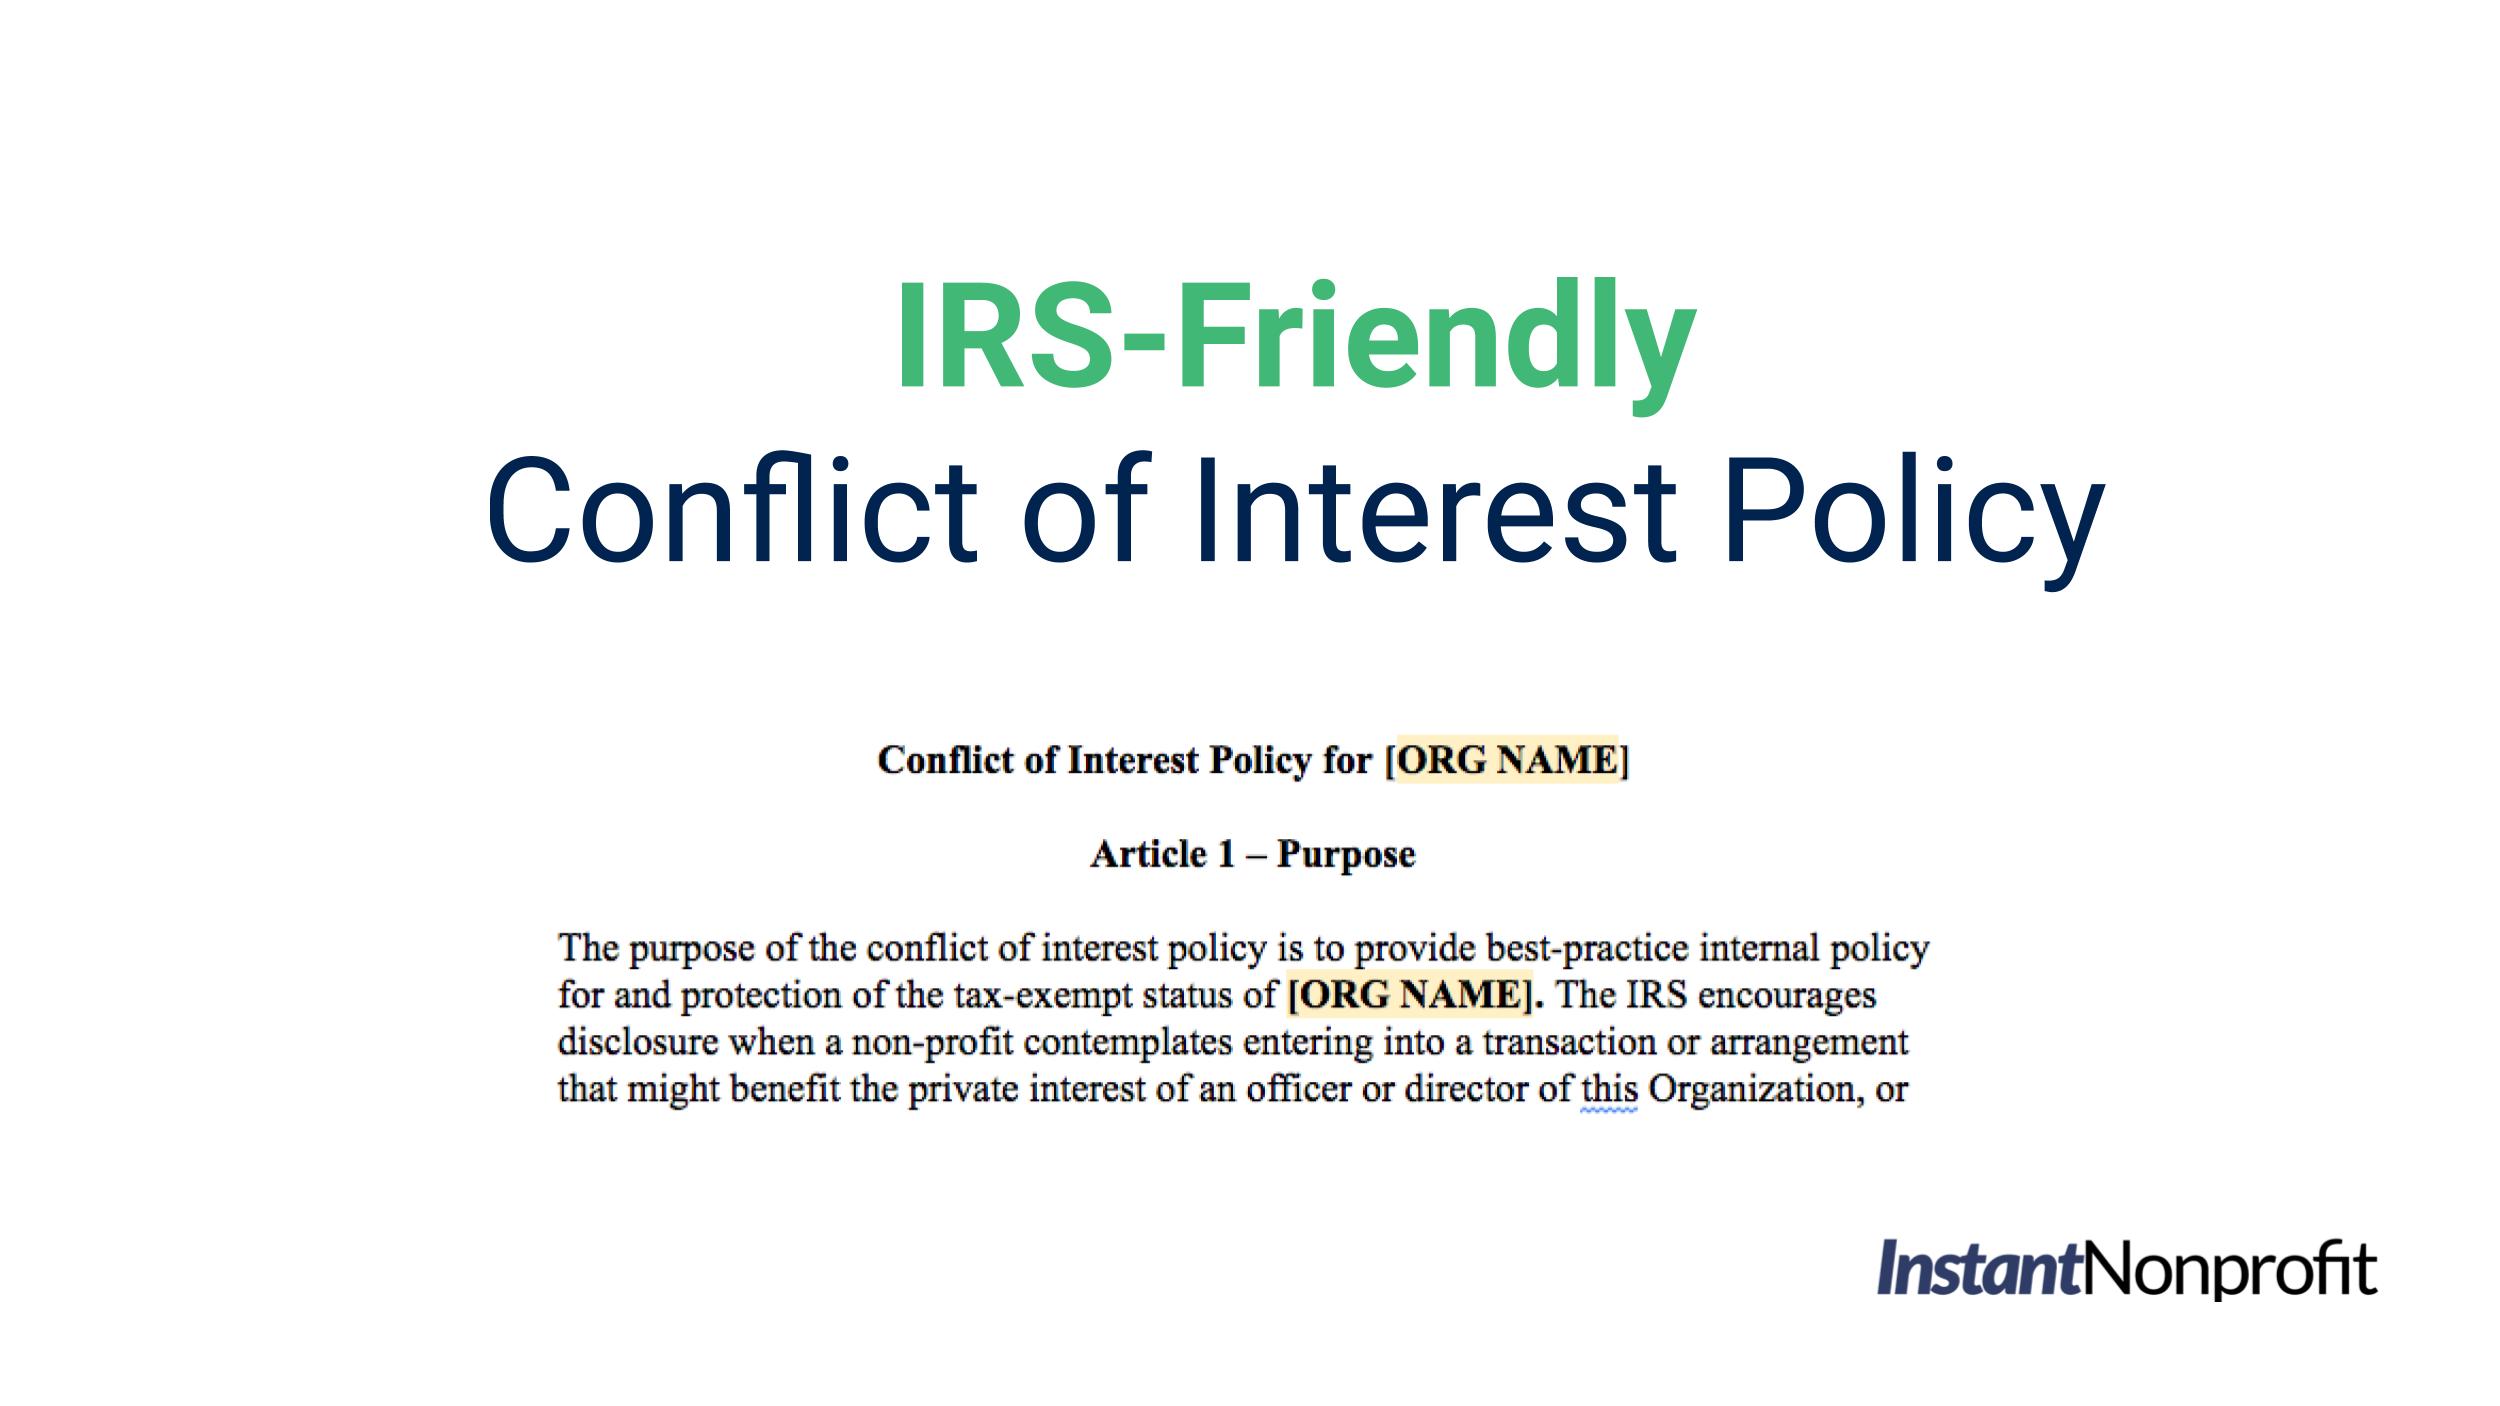 501c3 Conflict of Interest Policy